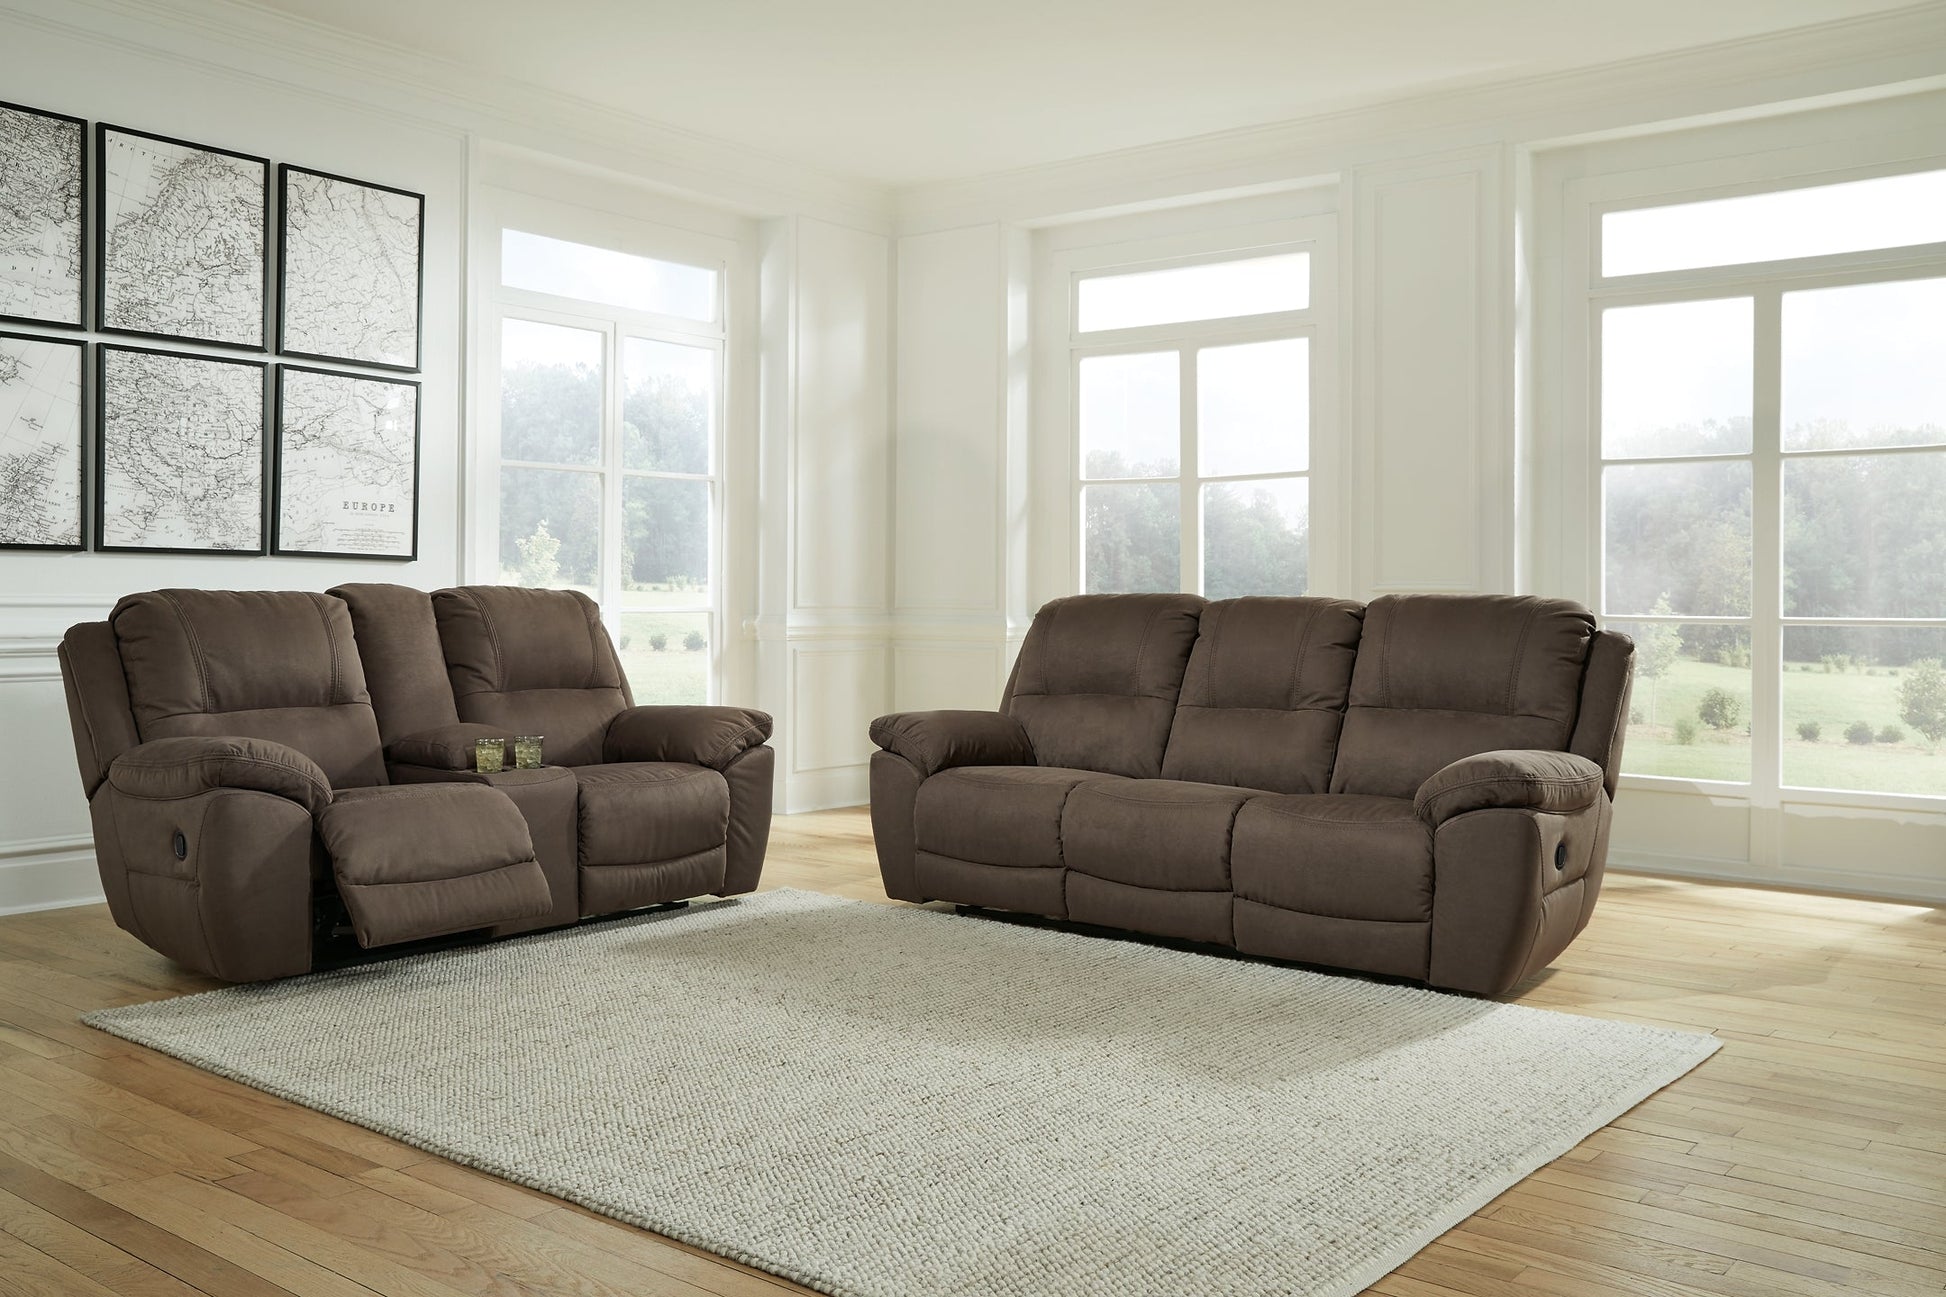 Next-Gen Gaucho Sofa and Loveseat at Walker Mattress and Furniture Locations in Cedar Park and Belton TX.